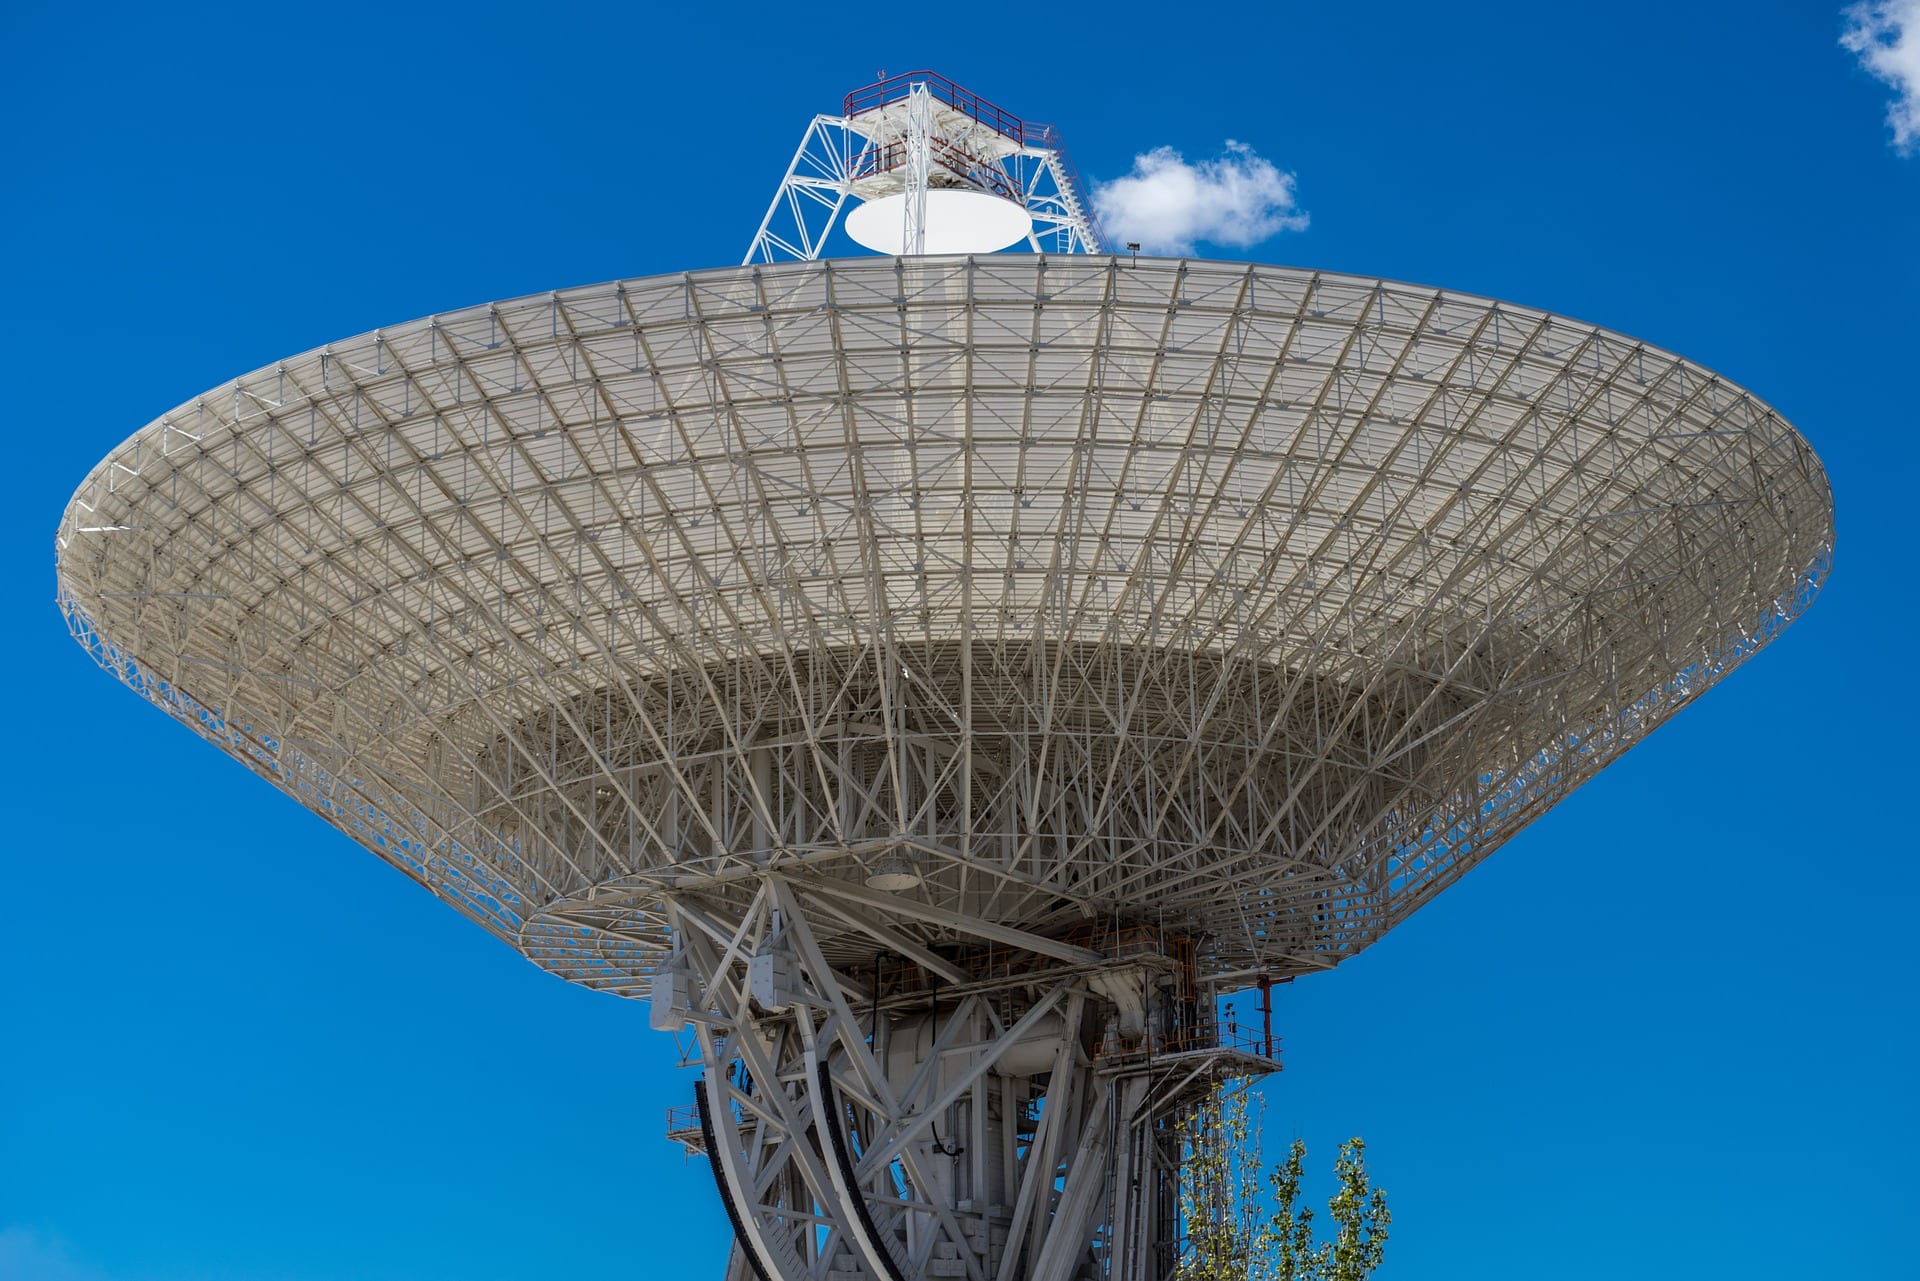 A large antenna pointed at the sky